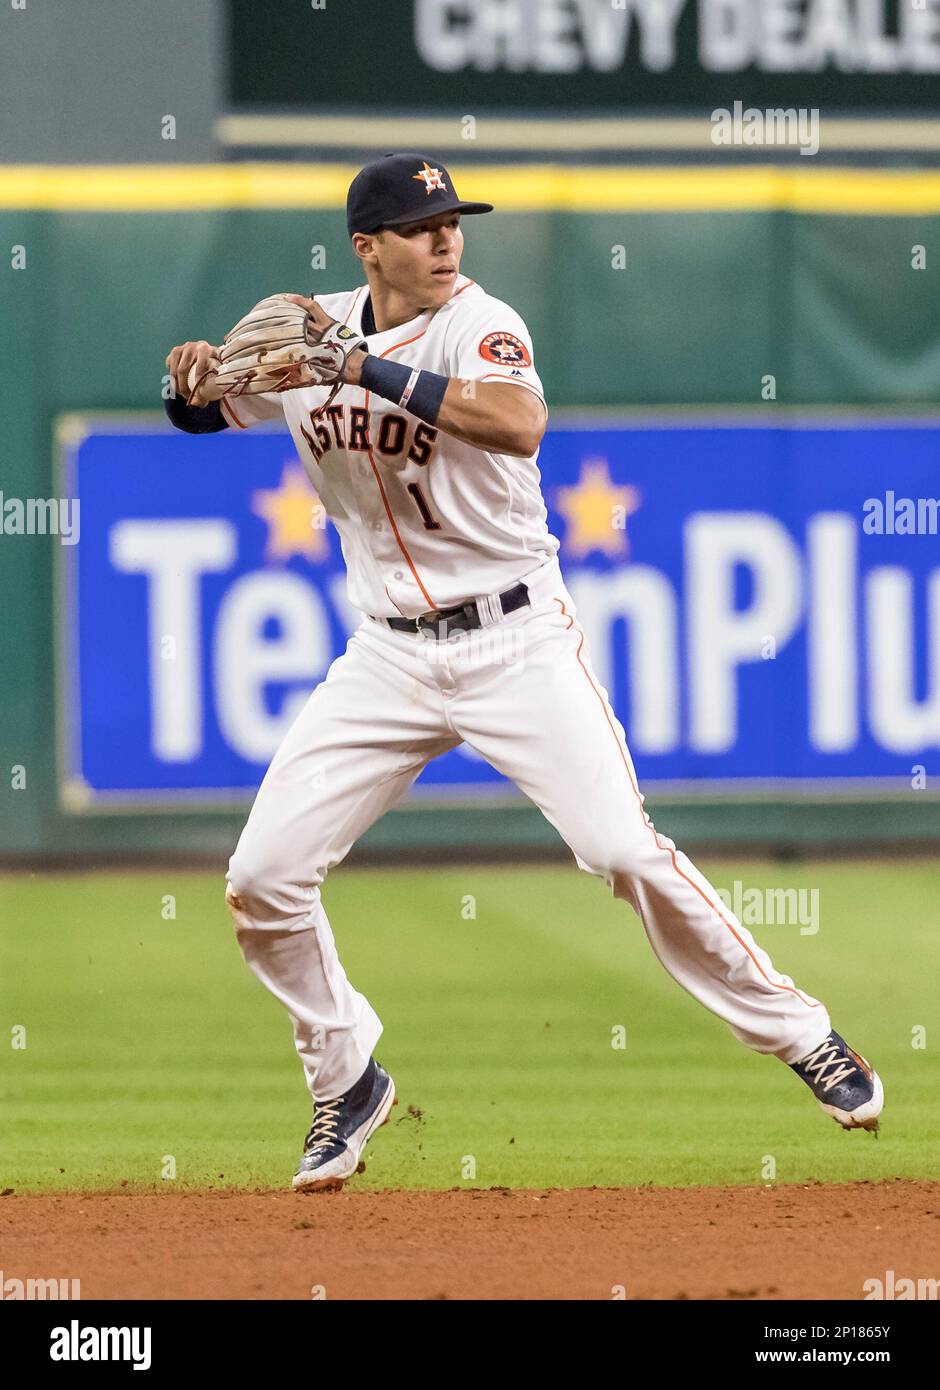 June 21, 2016: Houston Astros shortstop Carlos Correa (1) throws to first  during the Major League Baseball game between the Los Angeles Angels of  Anaheim and the Houston Astros at Minute Maid